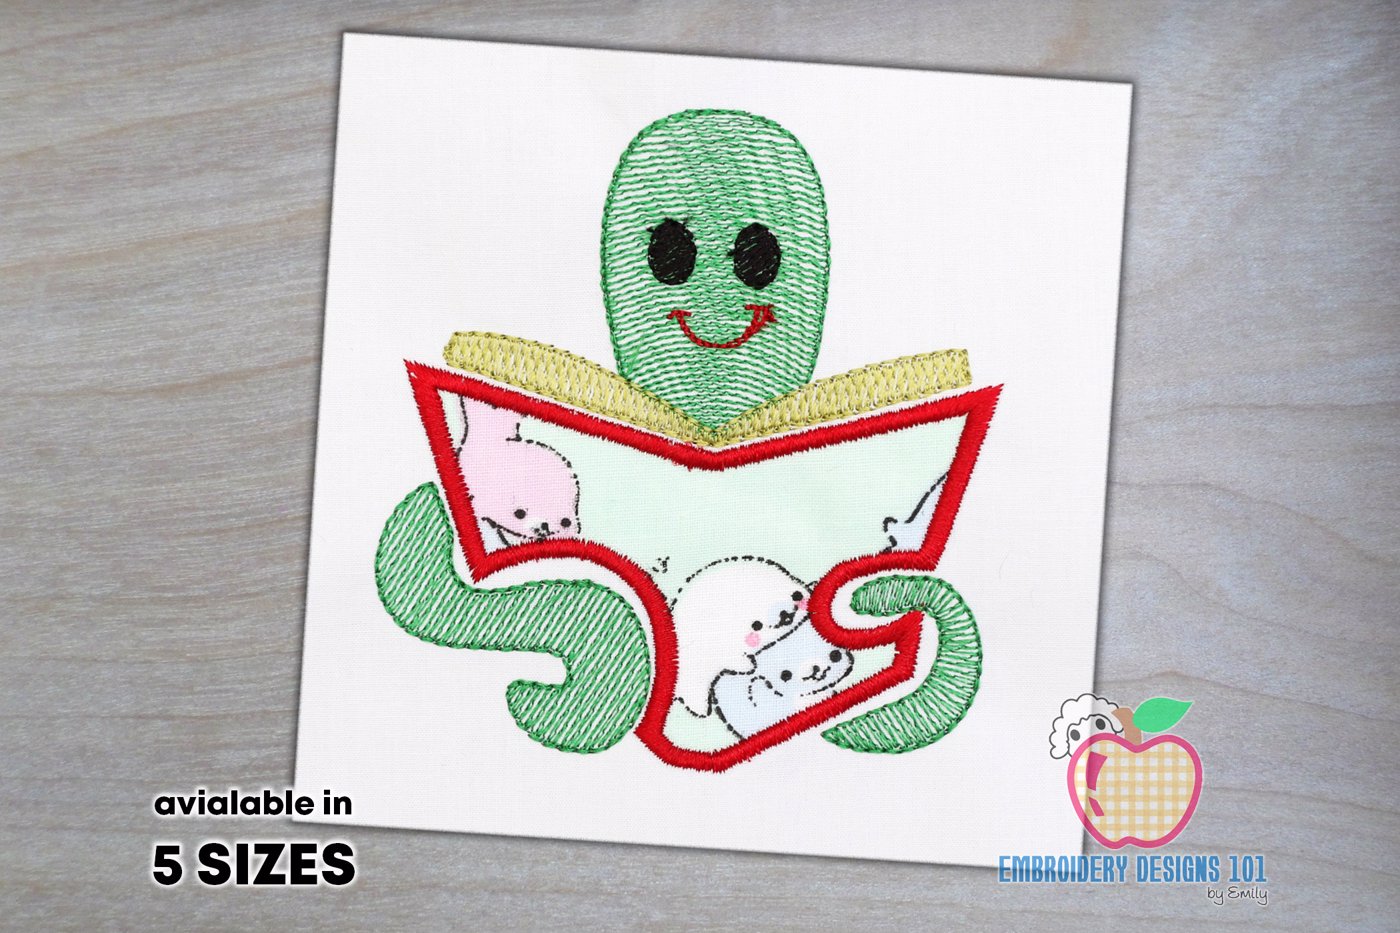 Worm with Book Applique Pattern